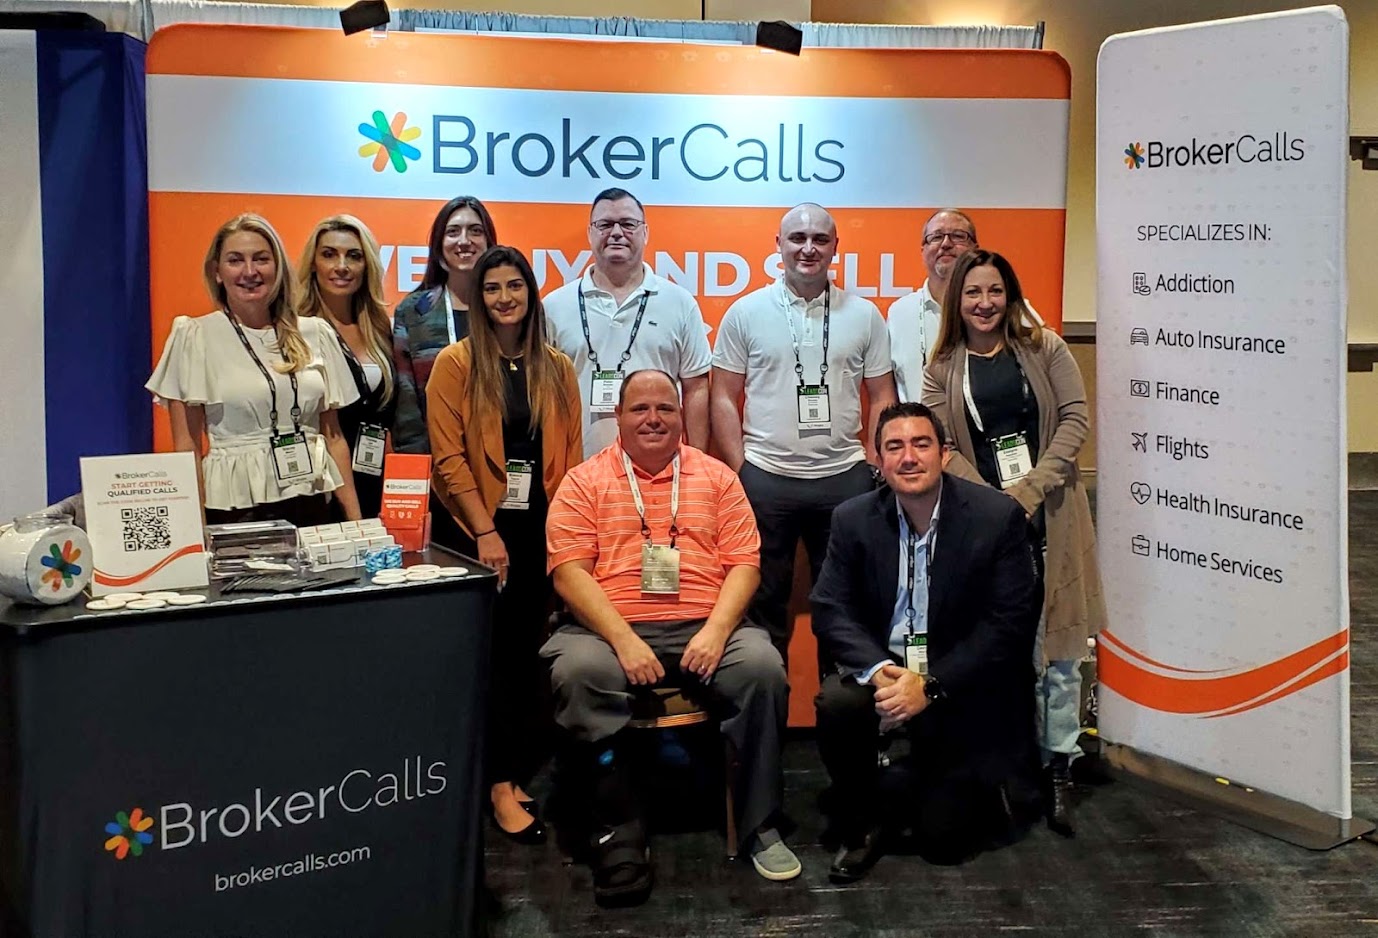 BrokerCalls at LeadsCon 2021: Recapping a Successful Show